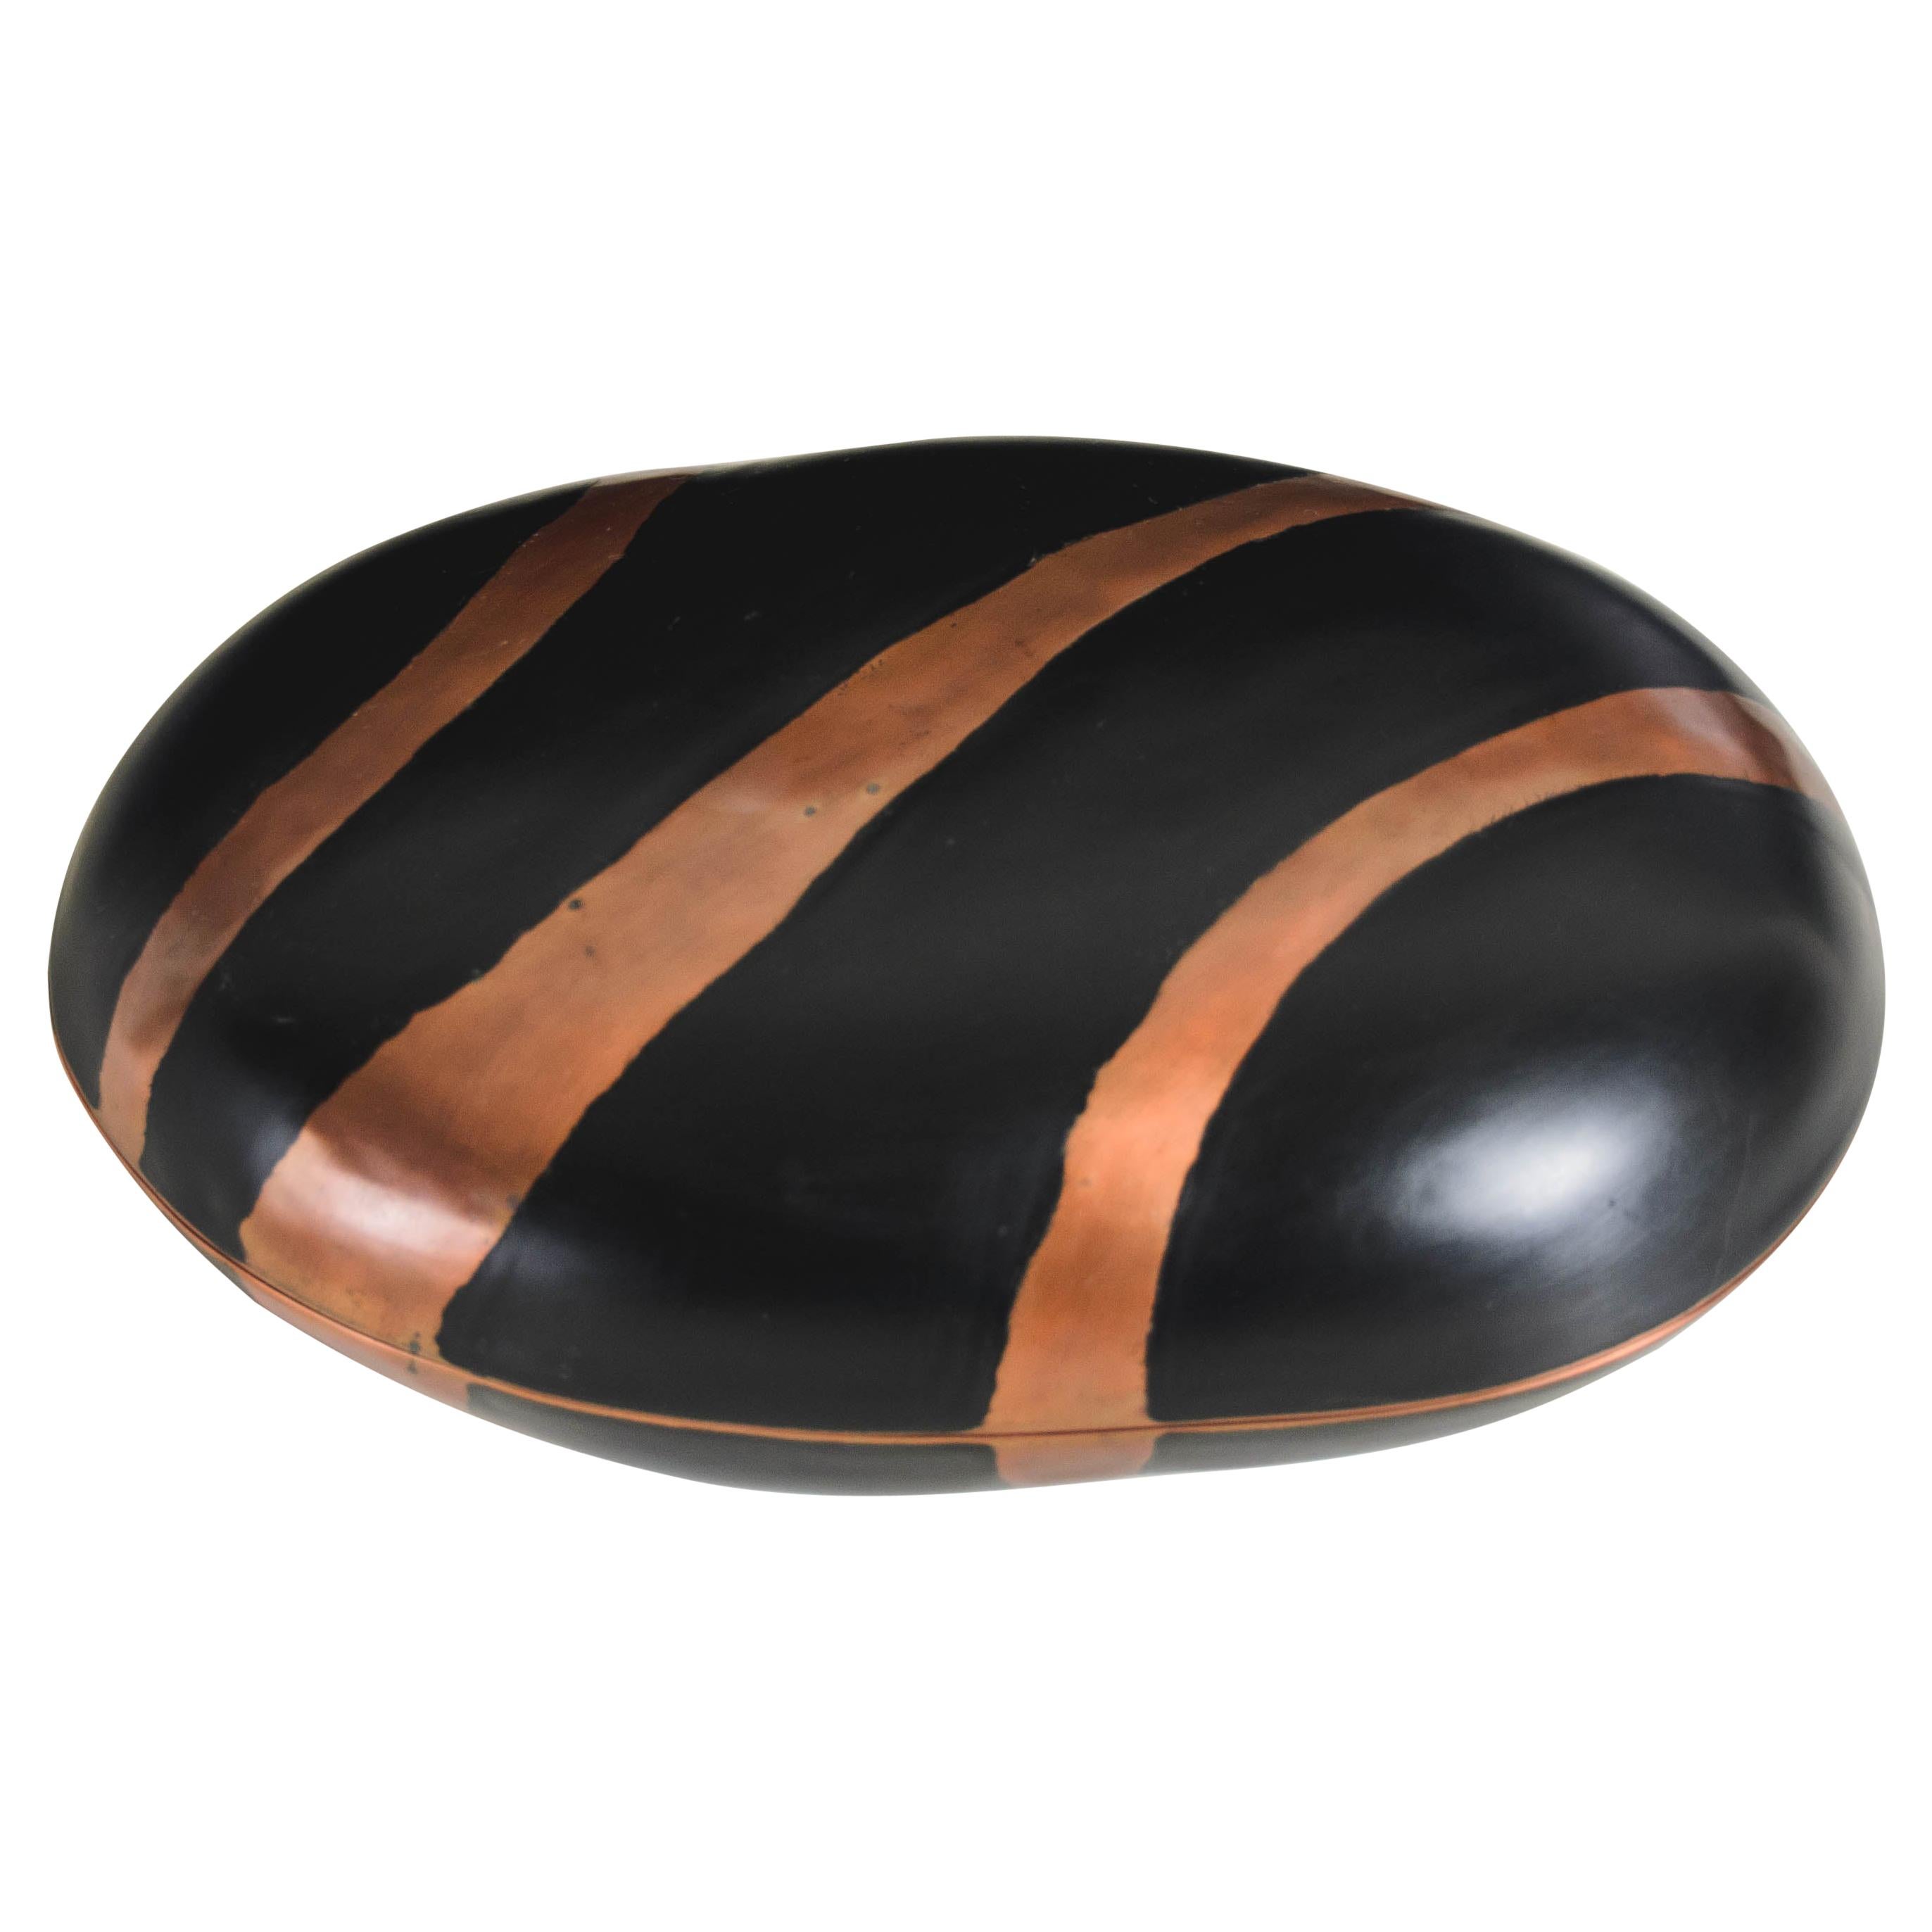 Small Zebra Box in Black Lacquer and Copper by Robert Kuo, Hand Repoussé For Sale